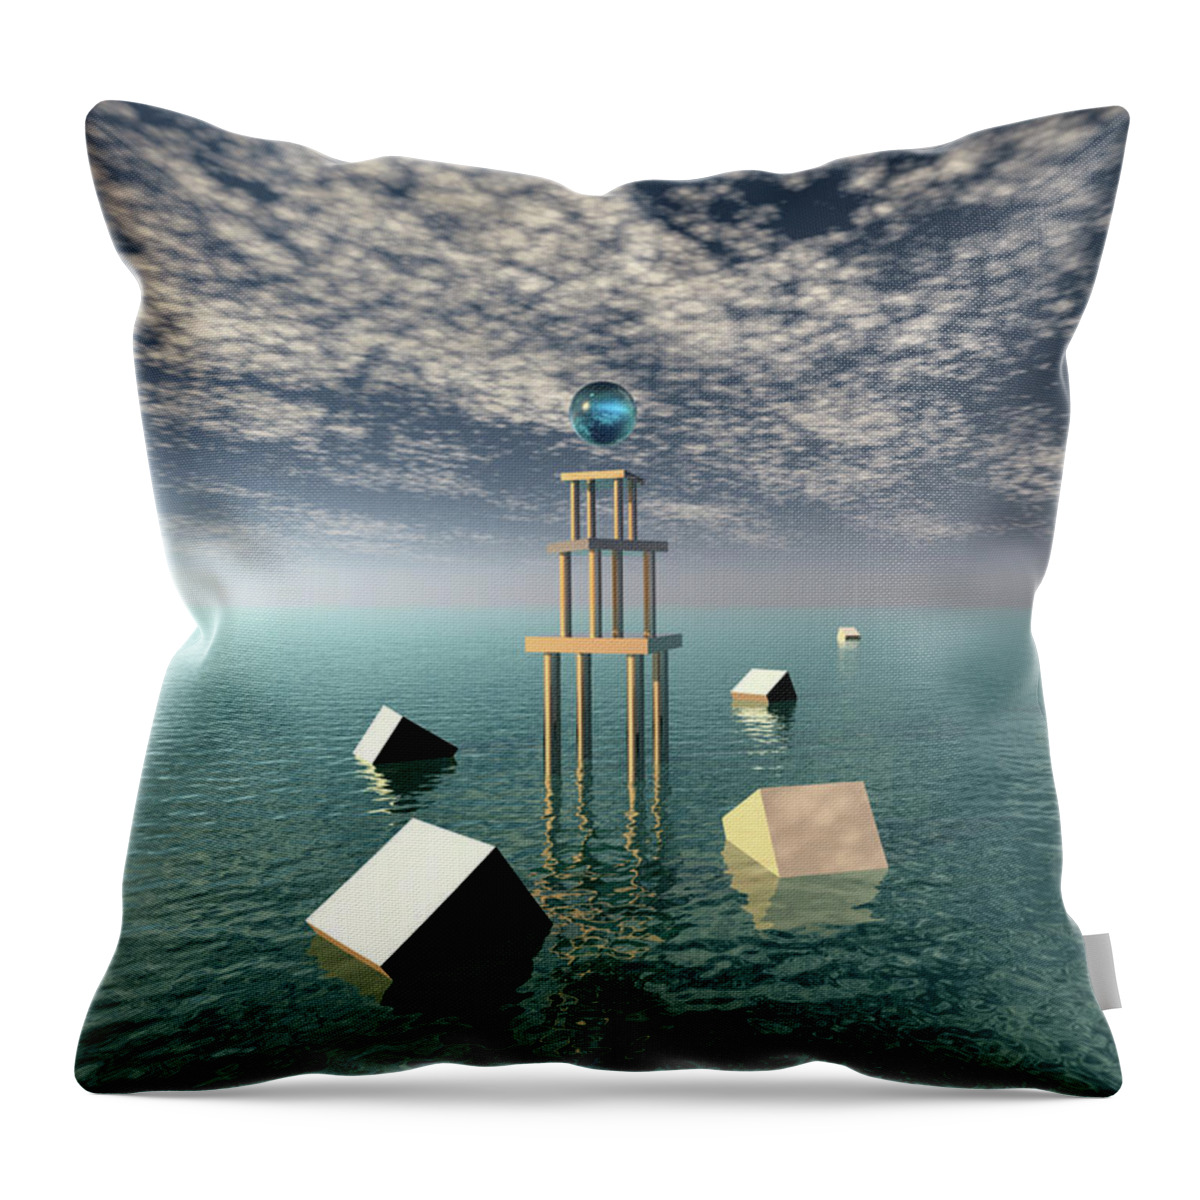 Clouds Throw Pillow featuring the digital art Glowing Blue Orb #1 by Phil Perkins